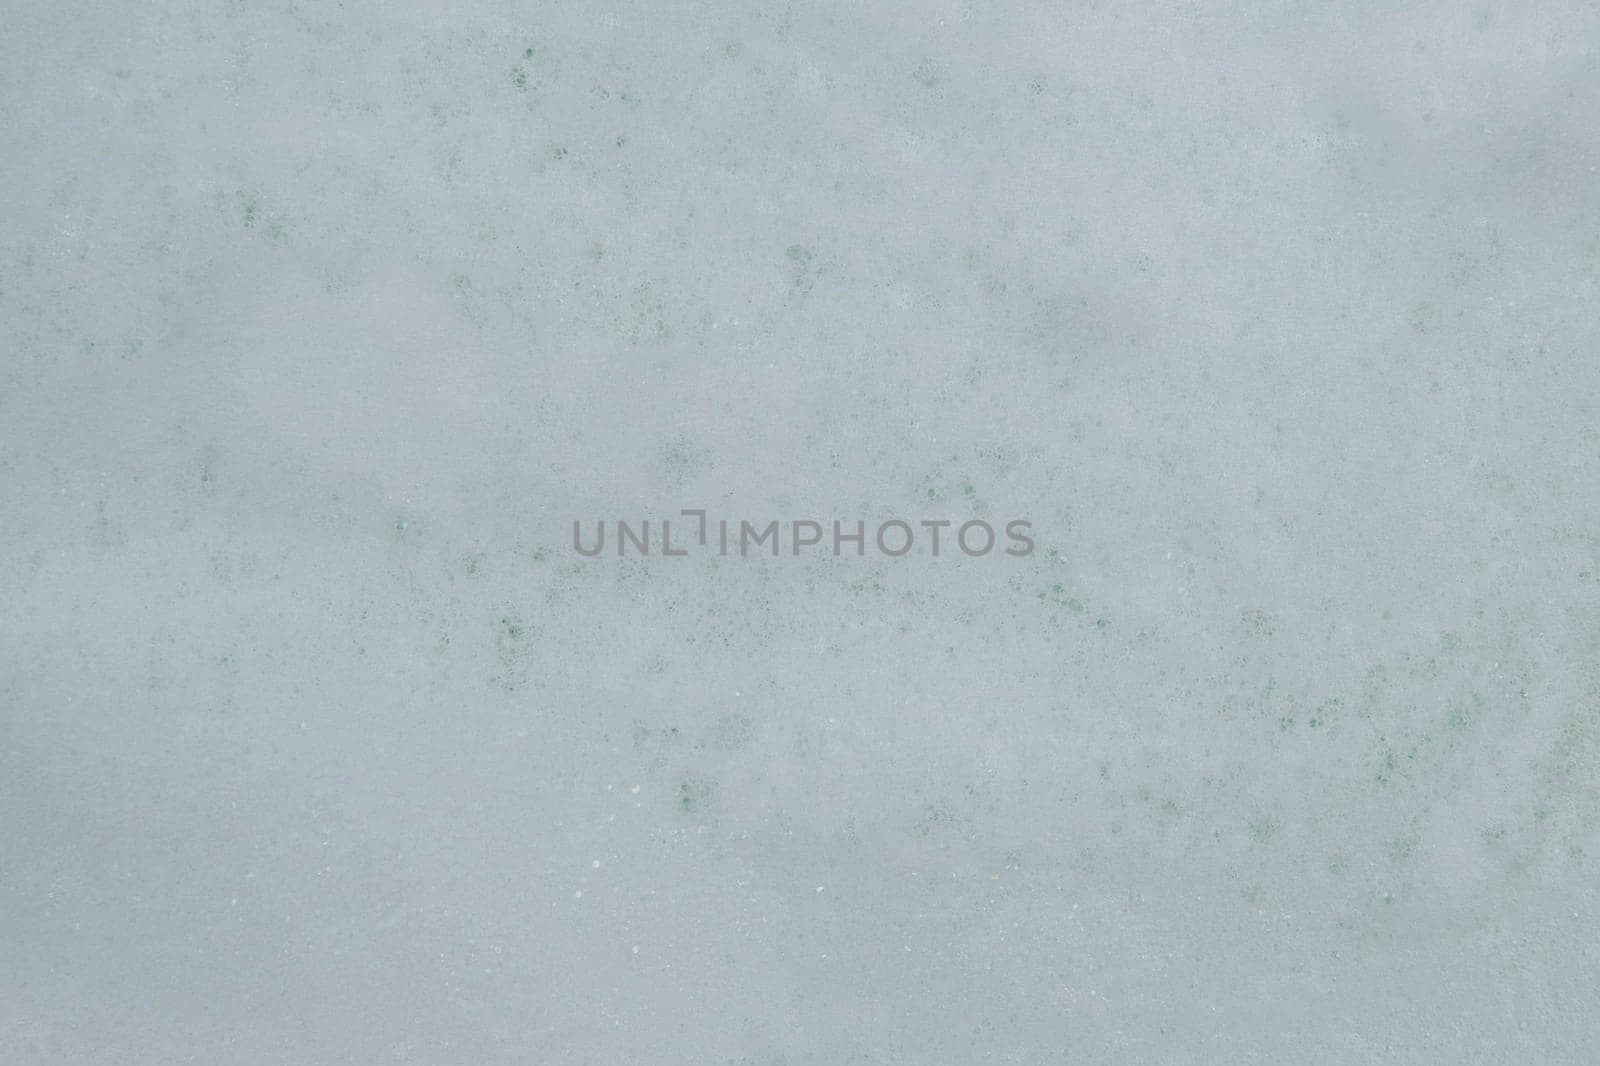 Texture of white soap foam with abstract soap bubbles background. by TEERASAK